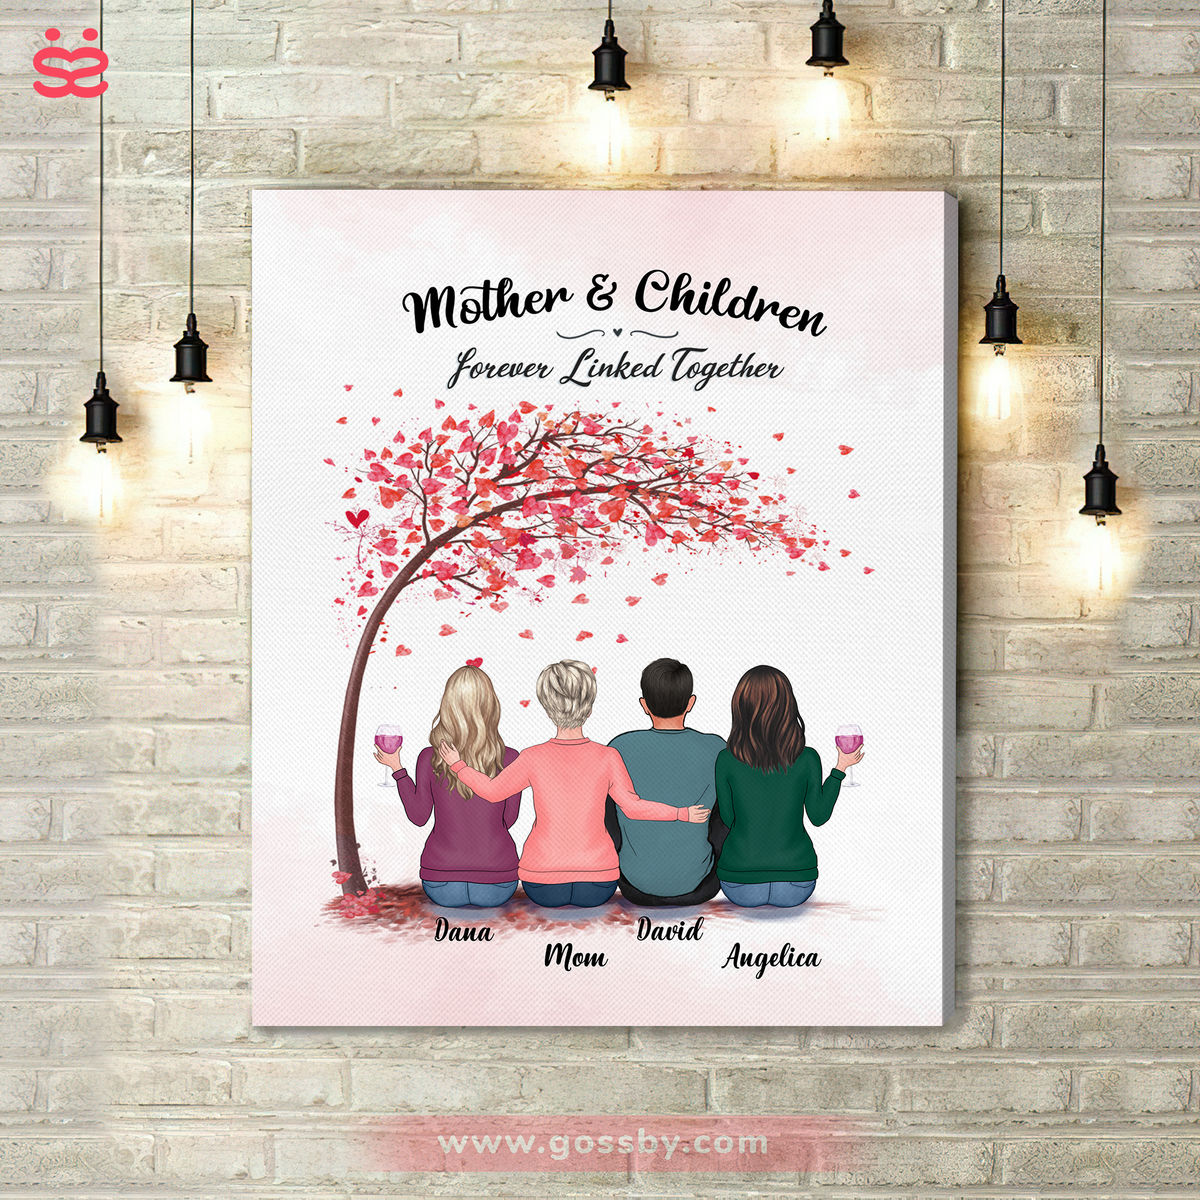 Personalized Wrapped Canvas - Mother's Day Canvas - Love - Mother And Children Forever Linked Together - Birthday Gift,Mother's Day Gift For Mom (1)